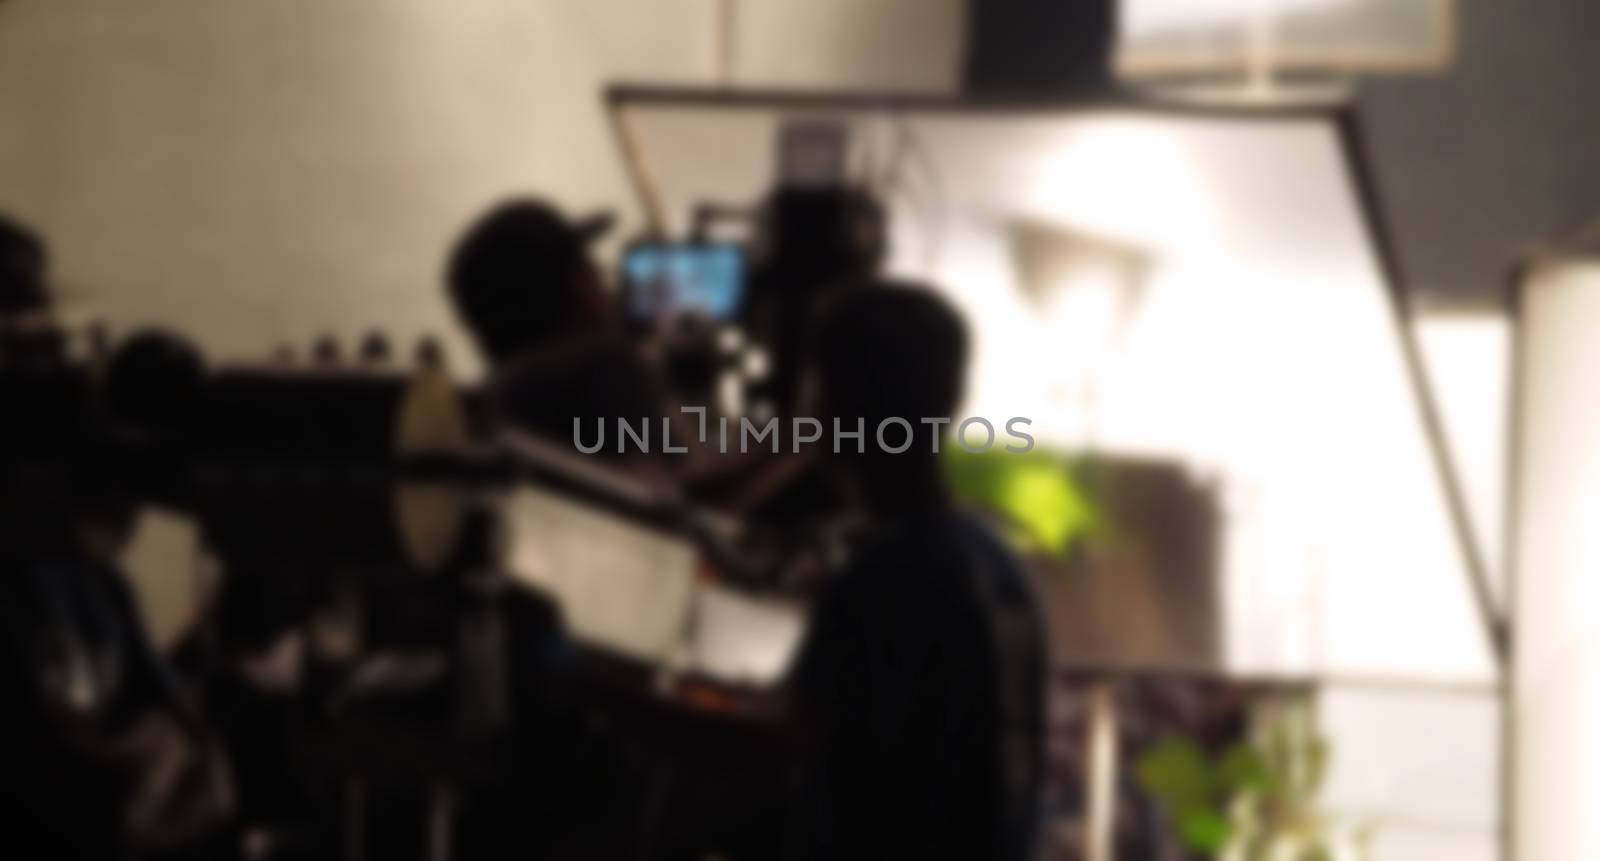 Blurred images of behind the scenes of filming or movie shooting by gnepphoto